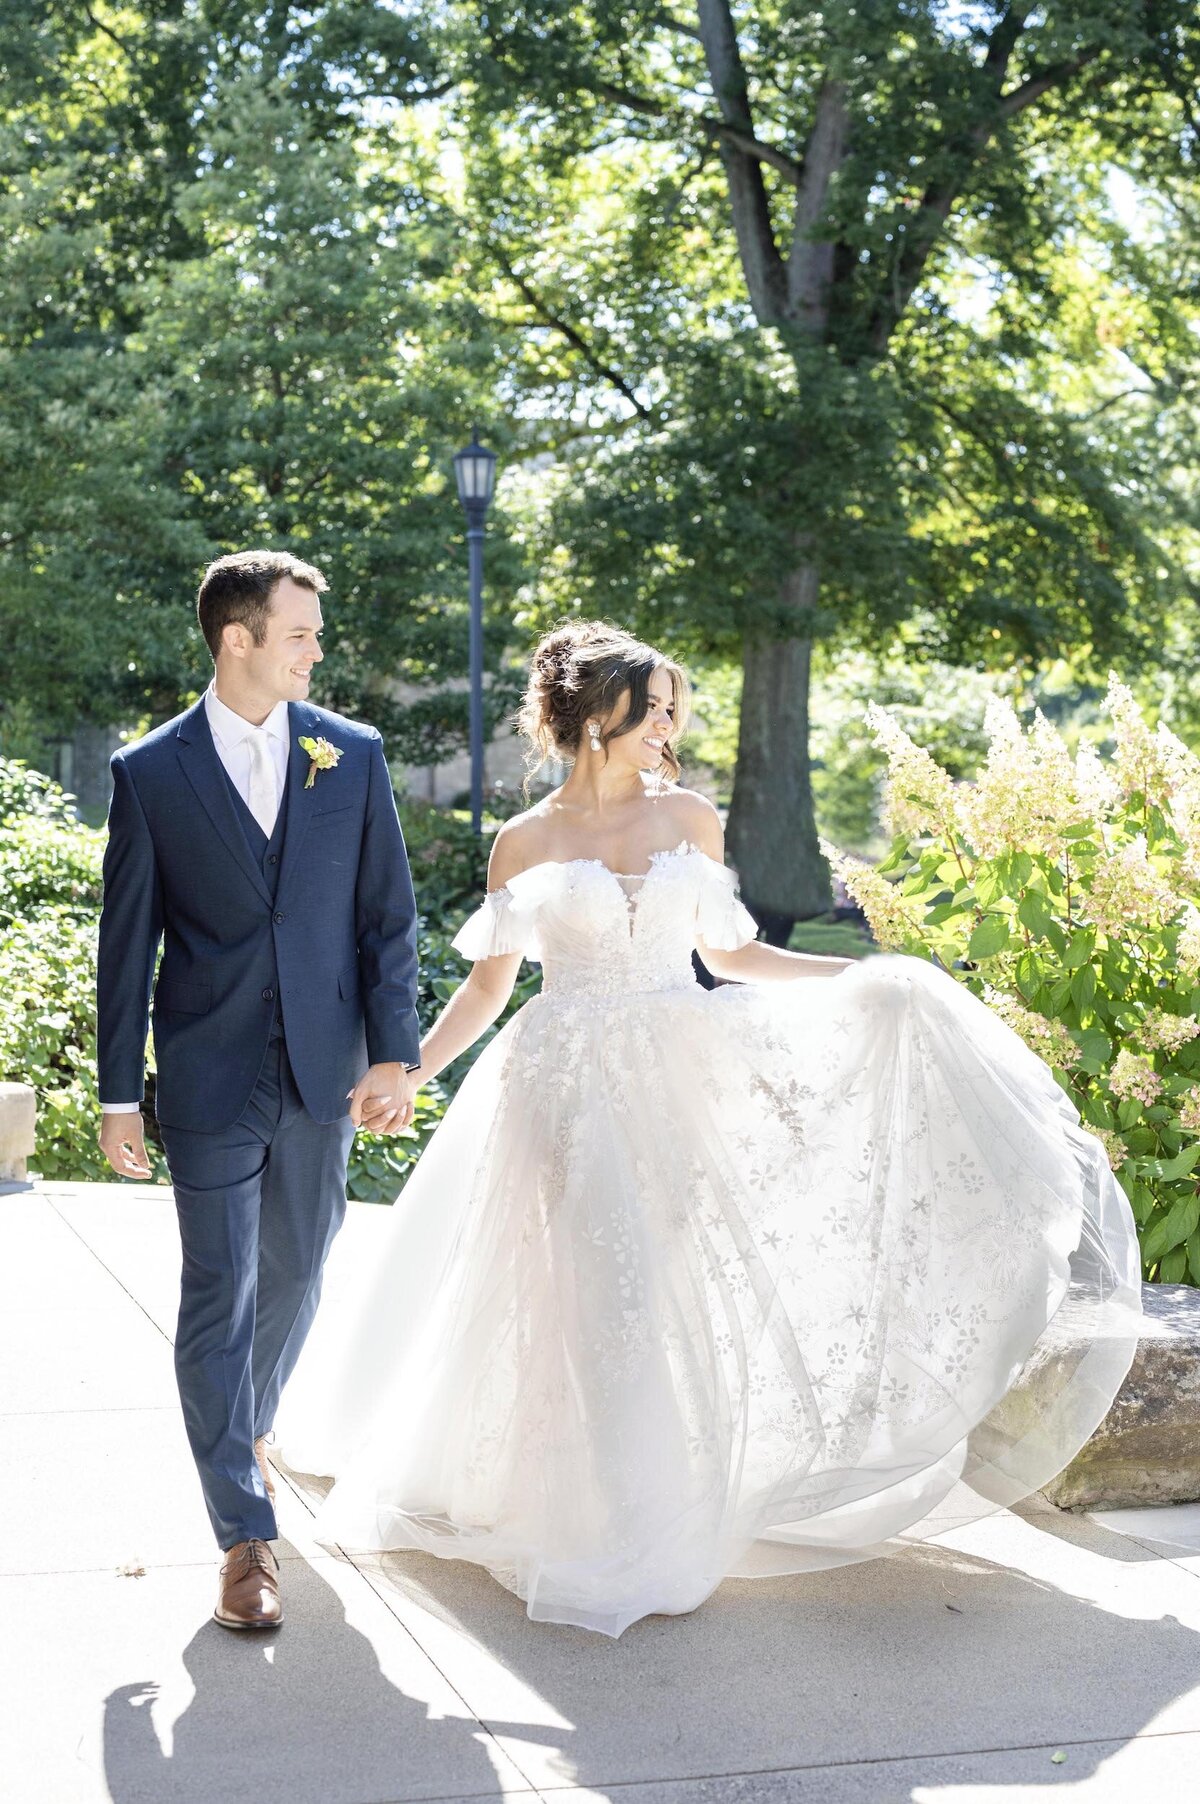 Bride and groom ballgown dress